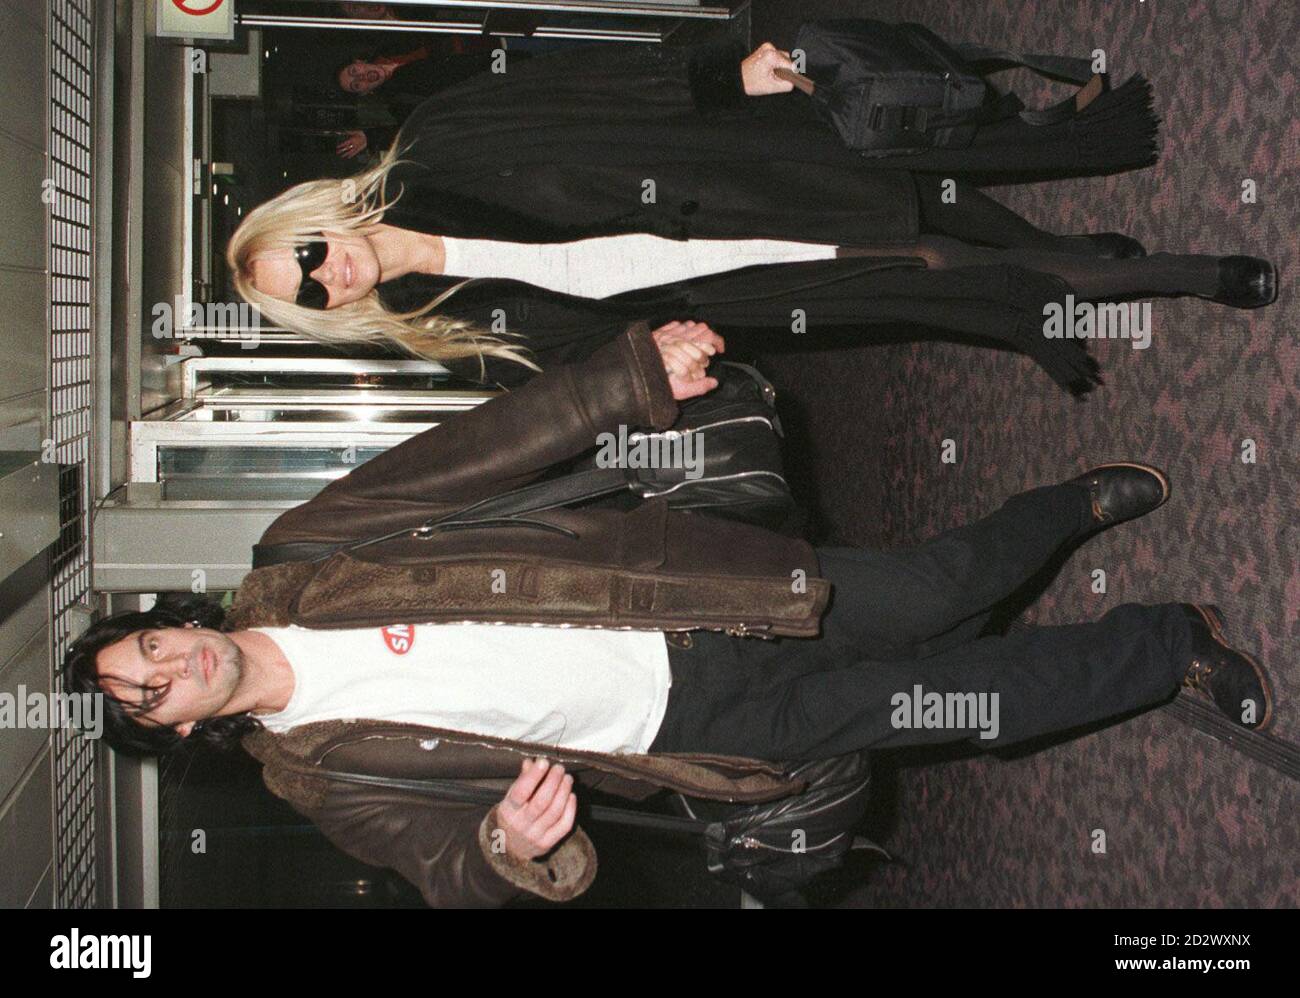 'Baywatch' star Pamela Anderson with her husband Tommy Lee at  Heathrow Airport before departing for Los Angeles today (Tuesday), after spending Christmas and the New Year in Europe. Stock Photo